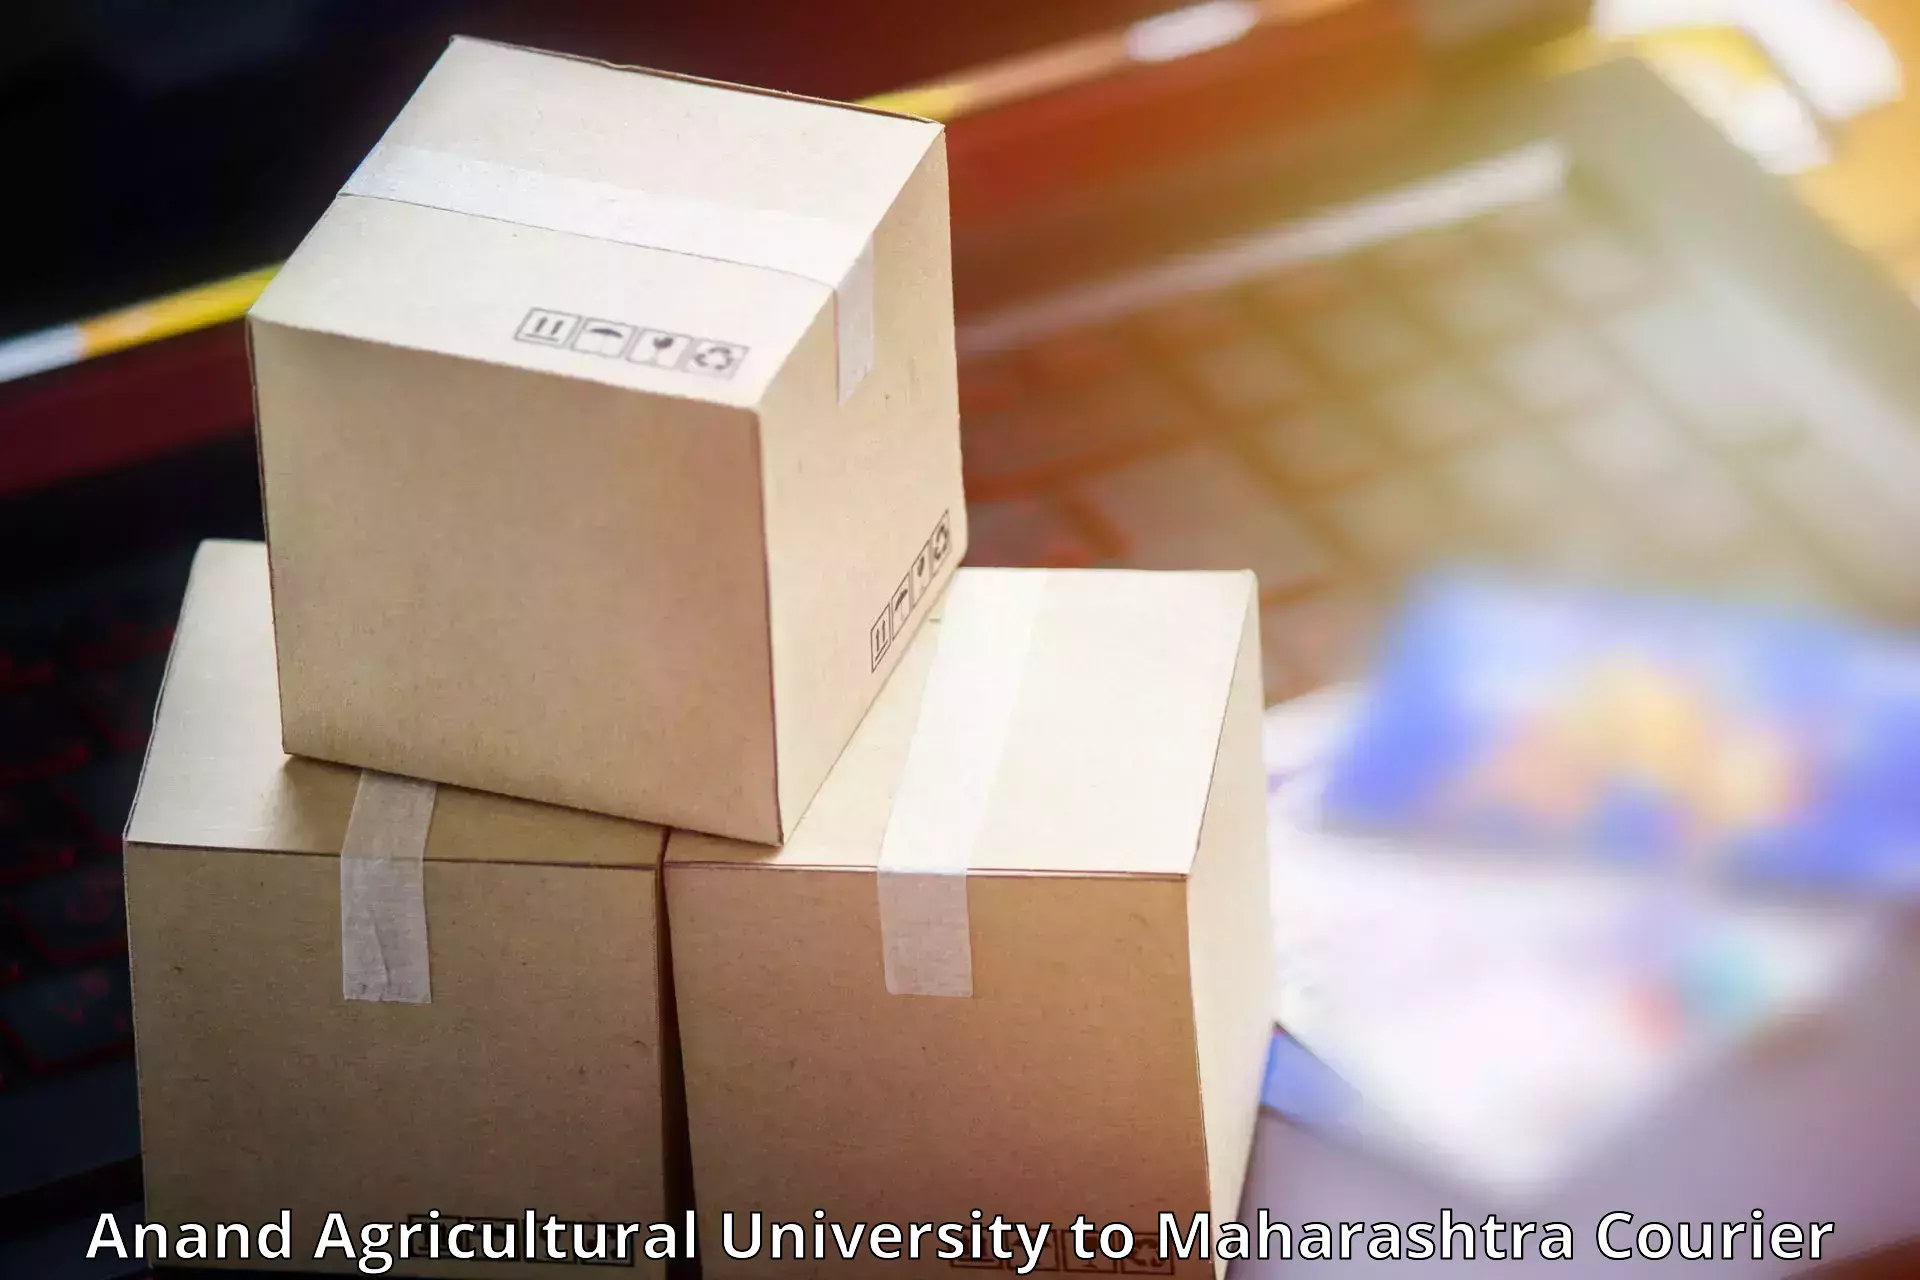 Special handling courier Anand Agricultural University to Ratnagiri